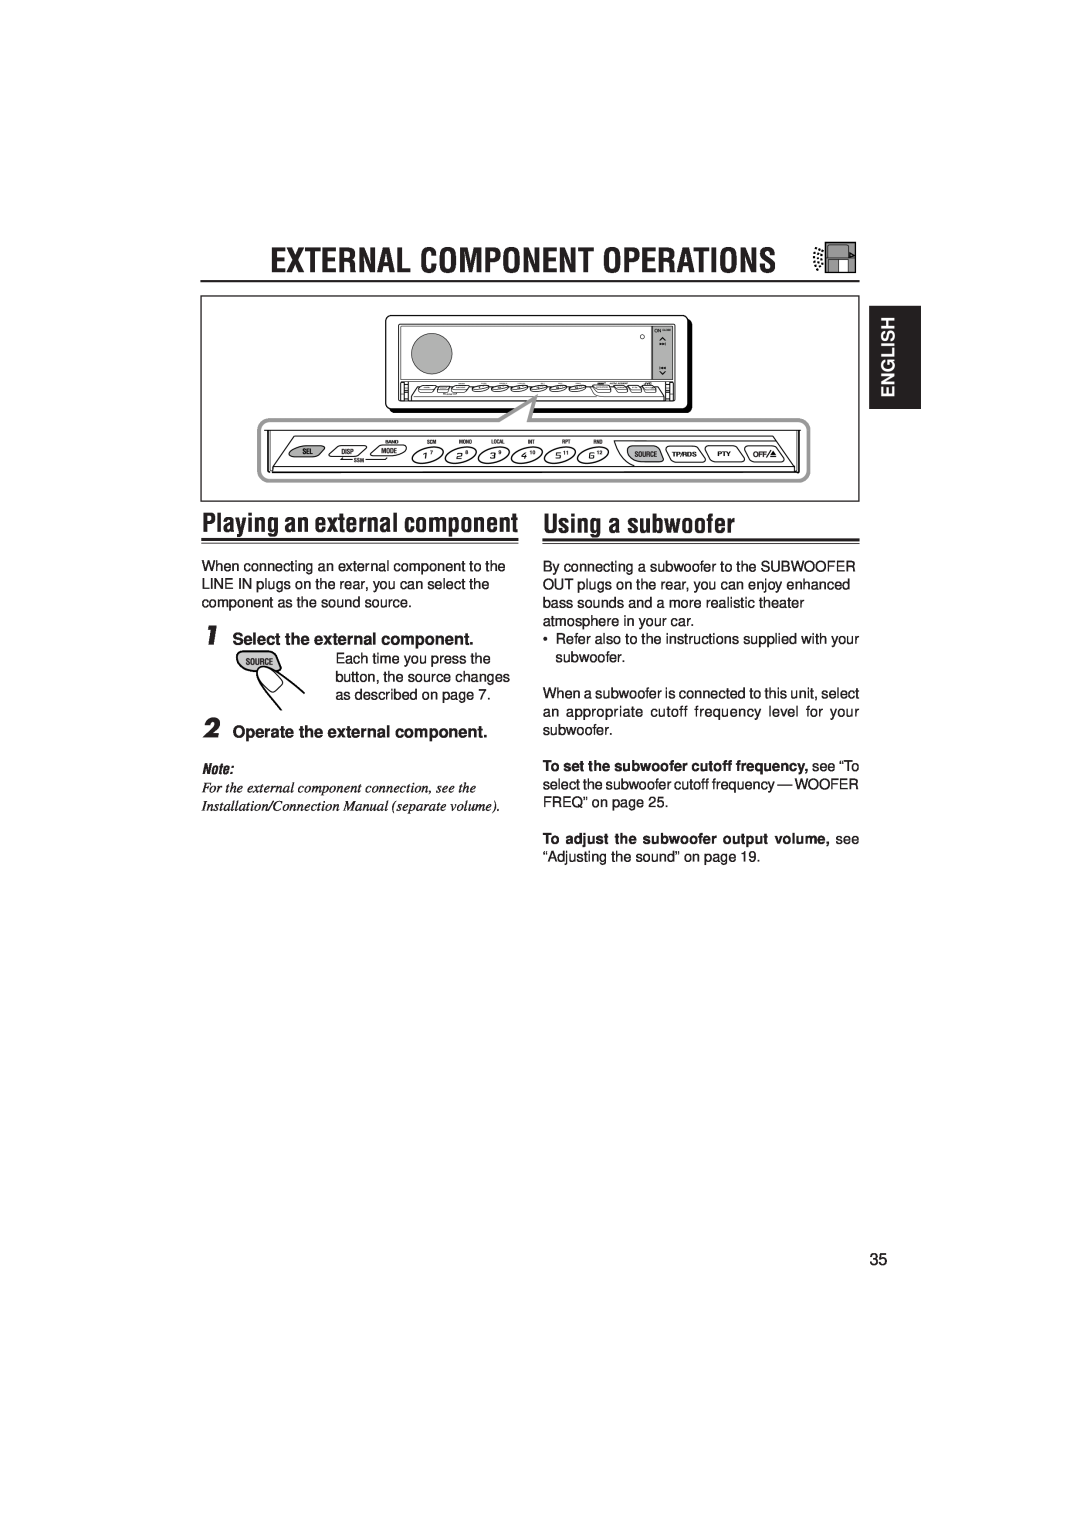 JVC KD-LX330R manual External Component Operations, Playing an external componentUsing a subwoofer, English 